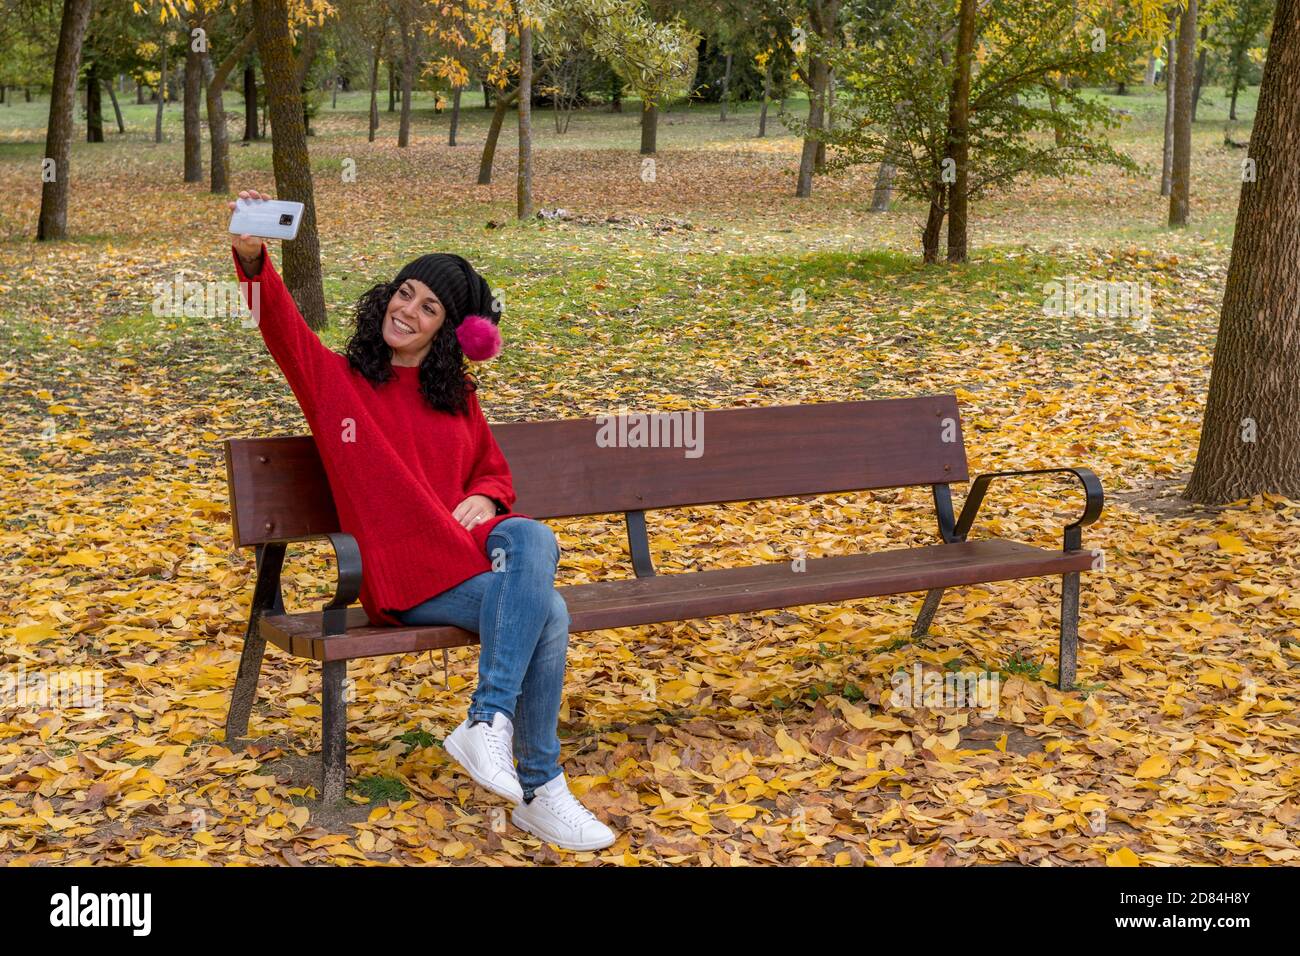 Young woman with curly black hair wearing a red woolen sweater and a black hat with a pink pom-pom sitting on a wooden bench while smiling taking a se Stock Photo